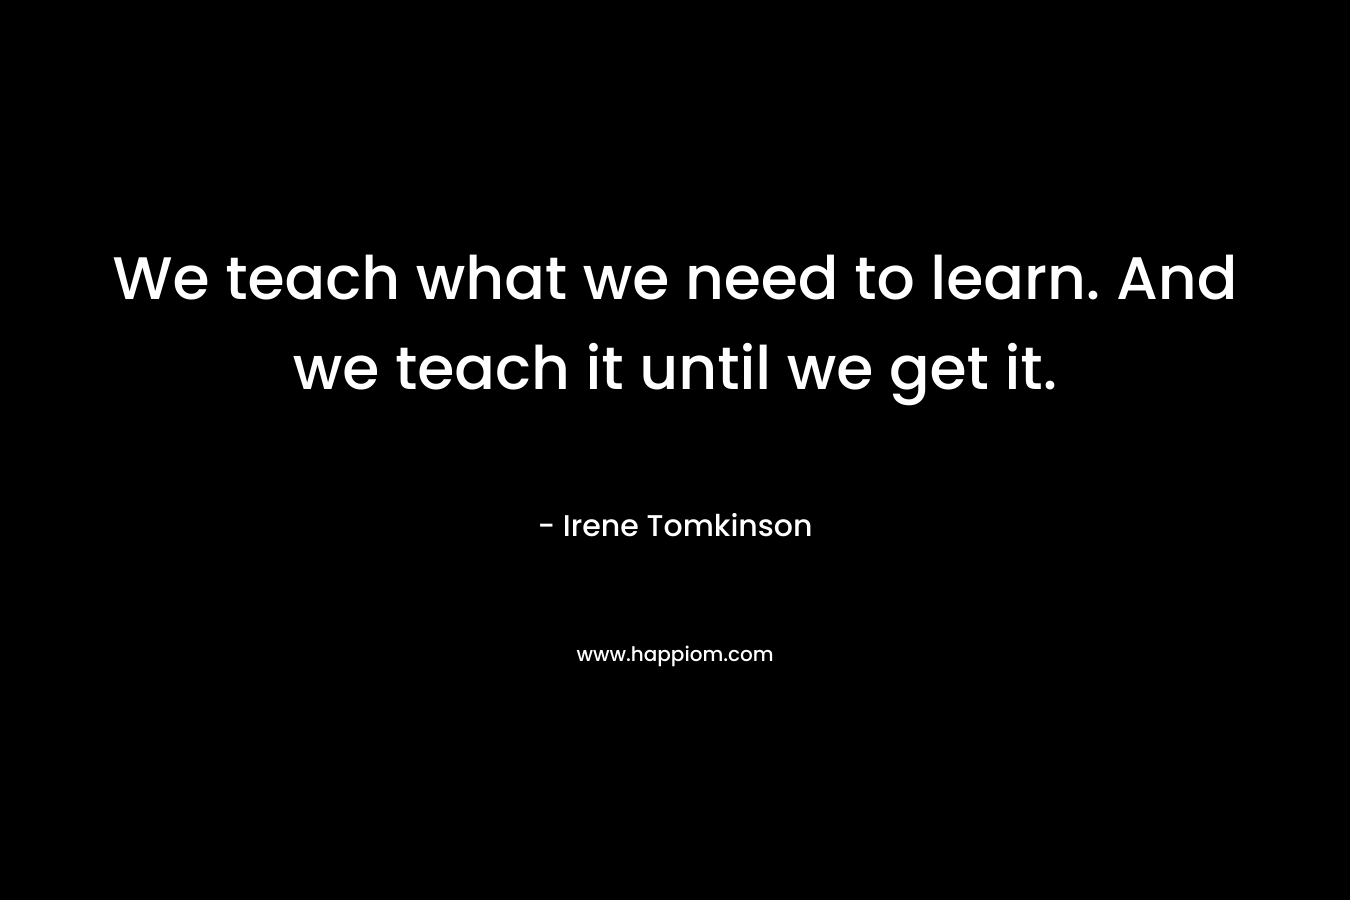 We teach what we need to learn. And we teach it until we get it. – Irene Tomkinson